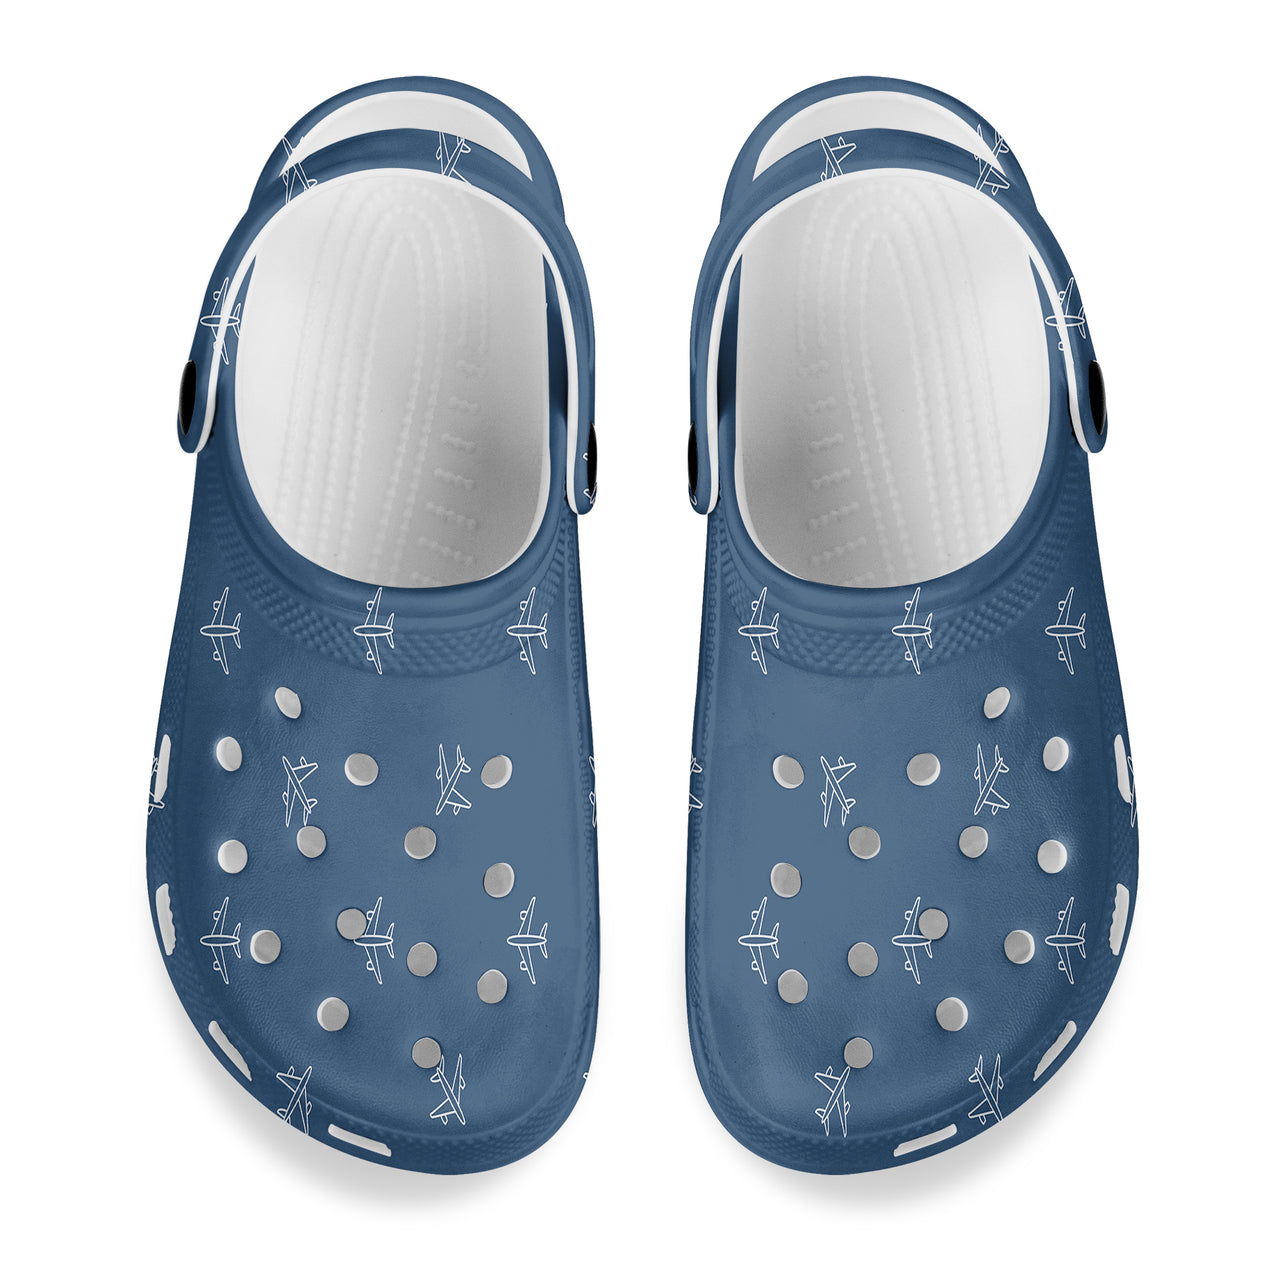 Nice Airplanes (Blue) Designed Hole Shoes & Slippers (MEN)